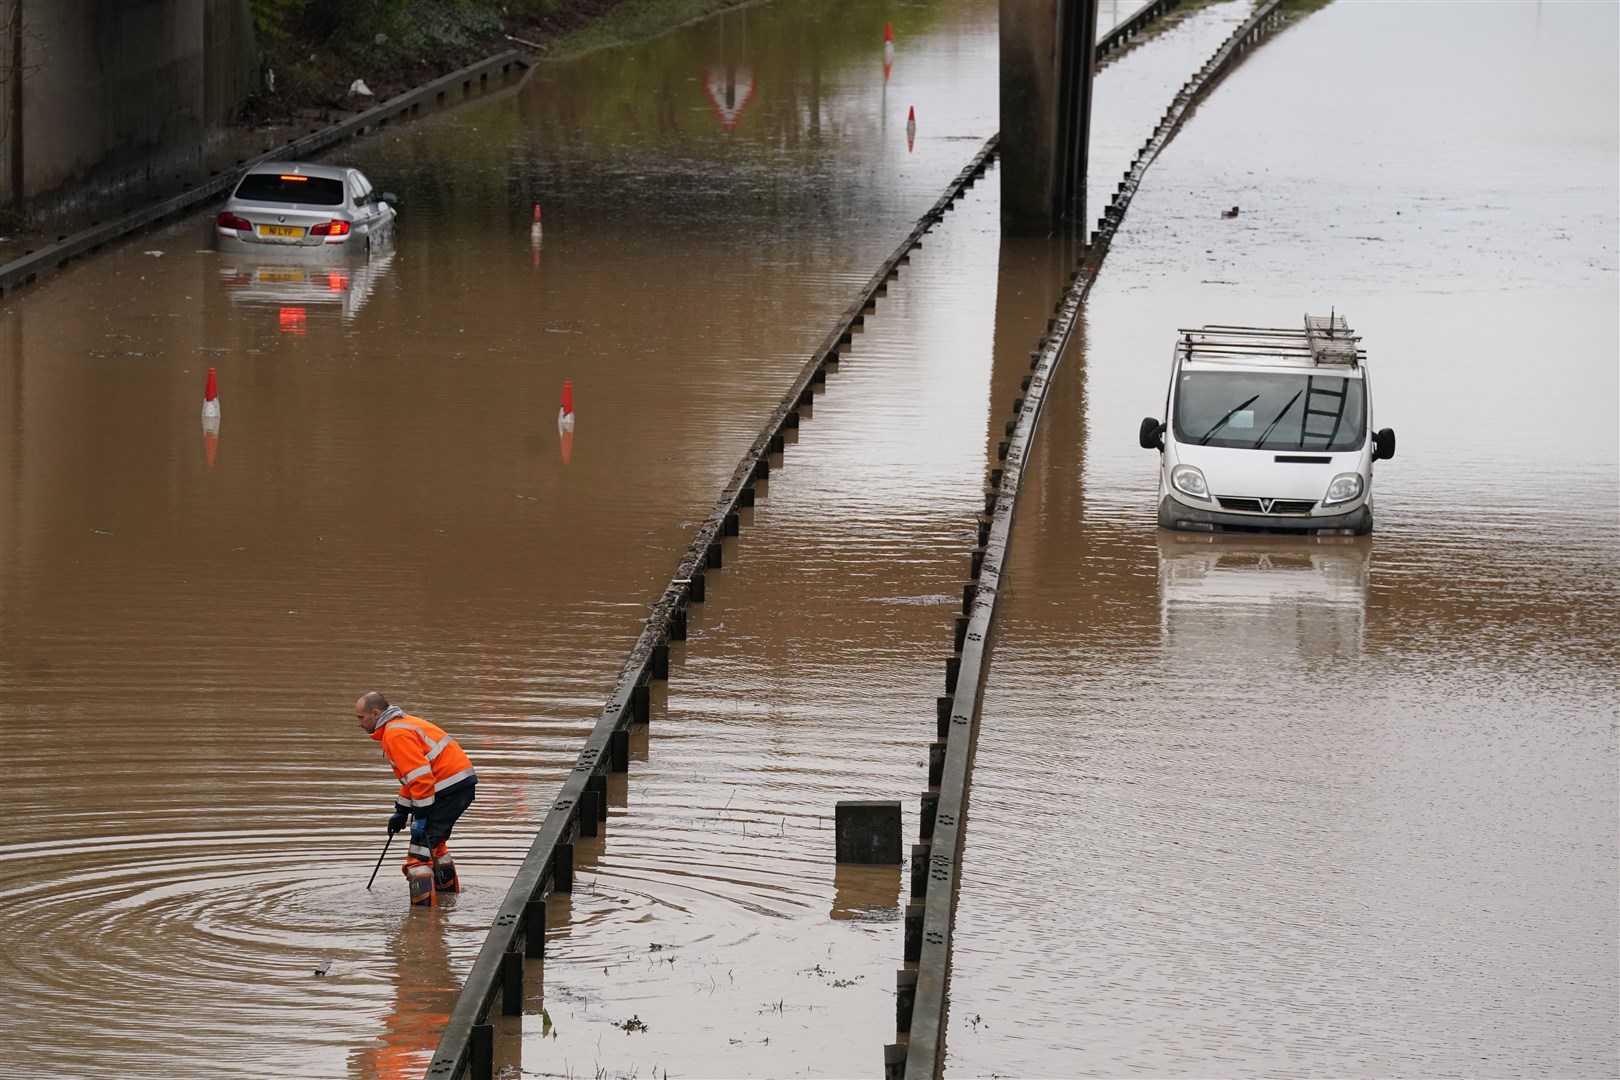 Cars stranded in floodwater on the A189 Spine Road near Blyth, Northumberland (Owen Humphreys/PA)